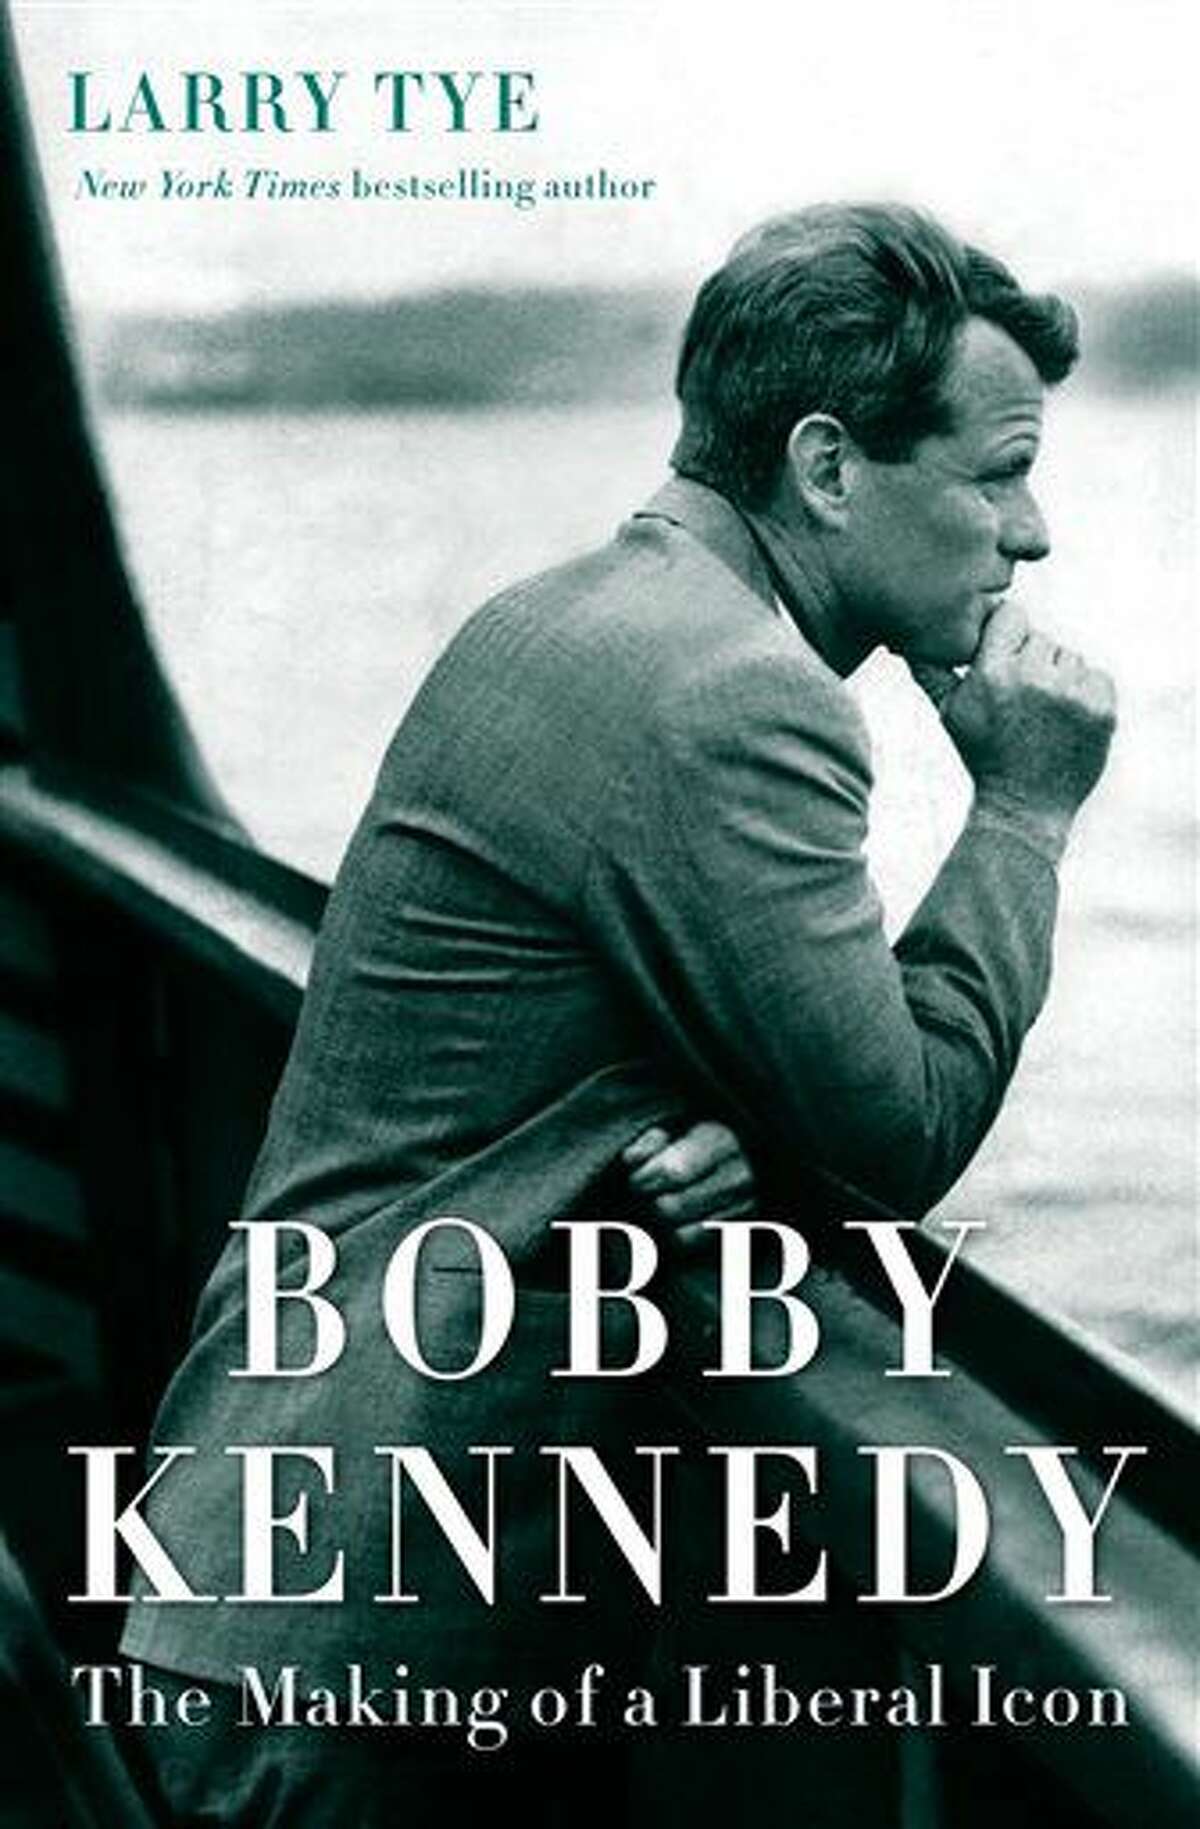 This book cover image released by Random House shows, "Bobby Kennedy: The Making of a Liberal Icon," by Larry Tye. (Random House via AP)